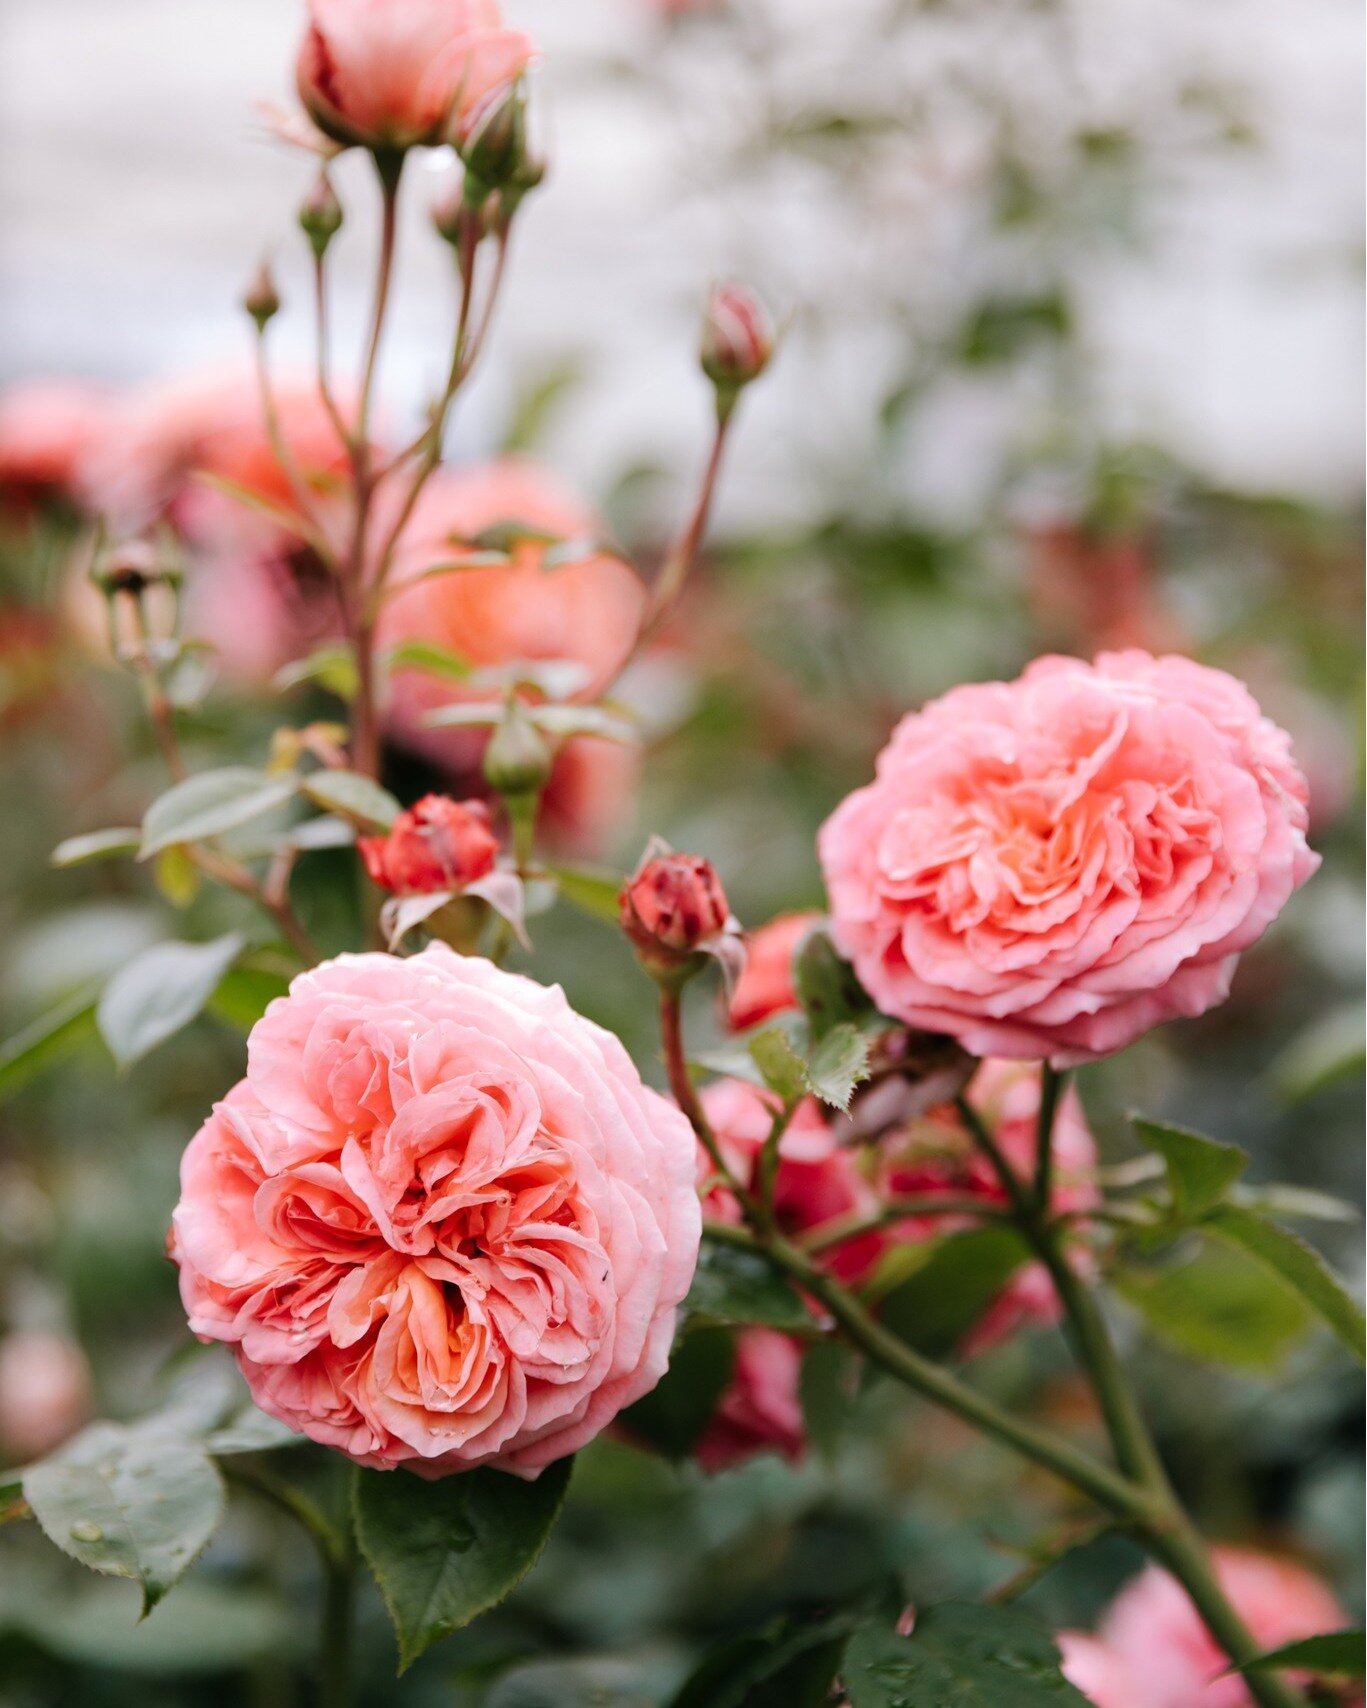 This gorgeous rose in store and in flower now - the Floribunda 'Sexy Rexy'. 

Just look at all those gorgeous layers!